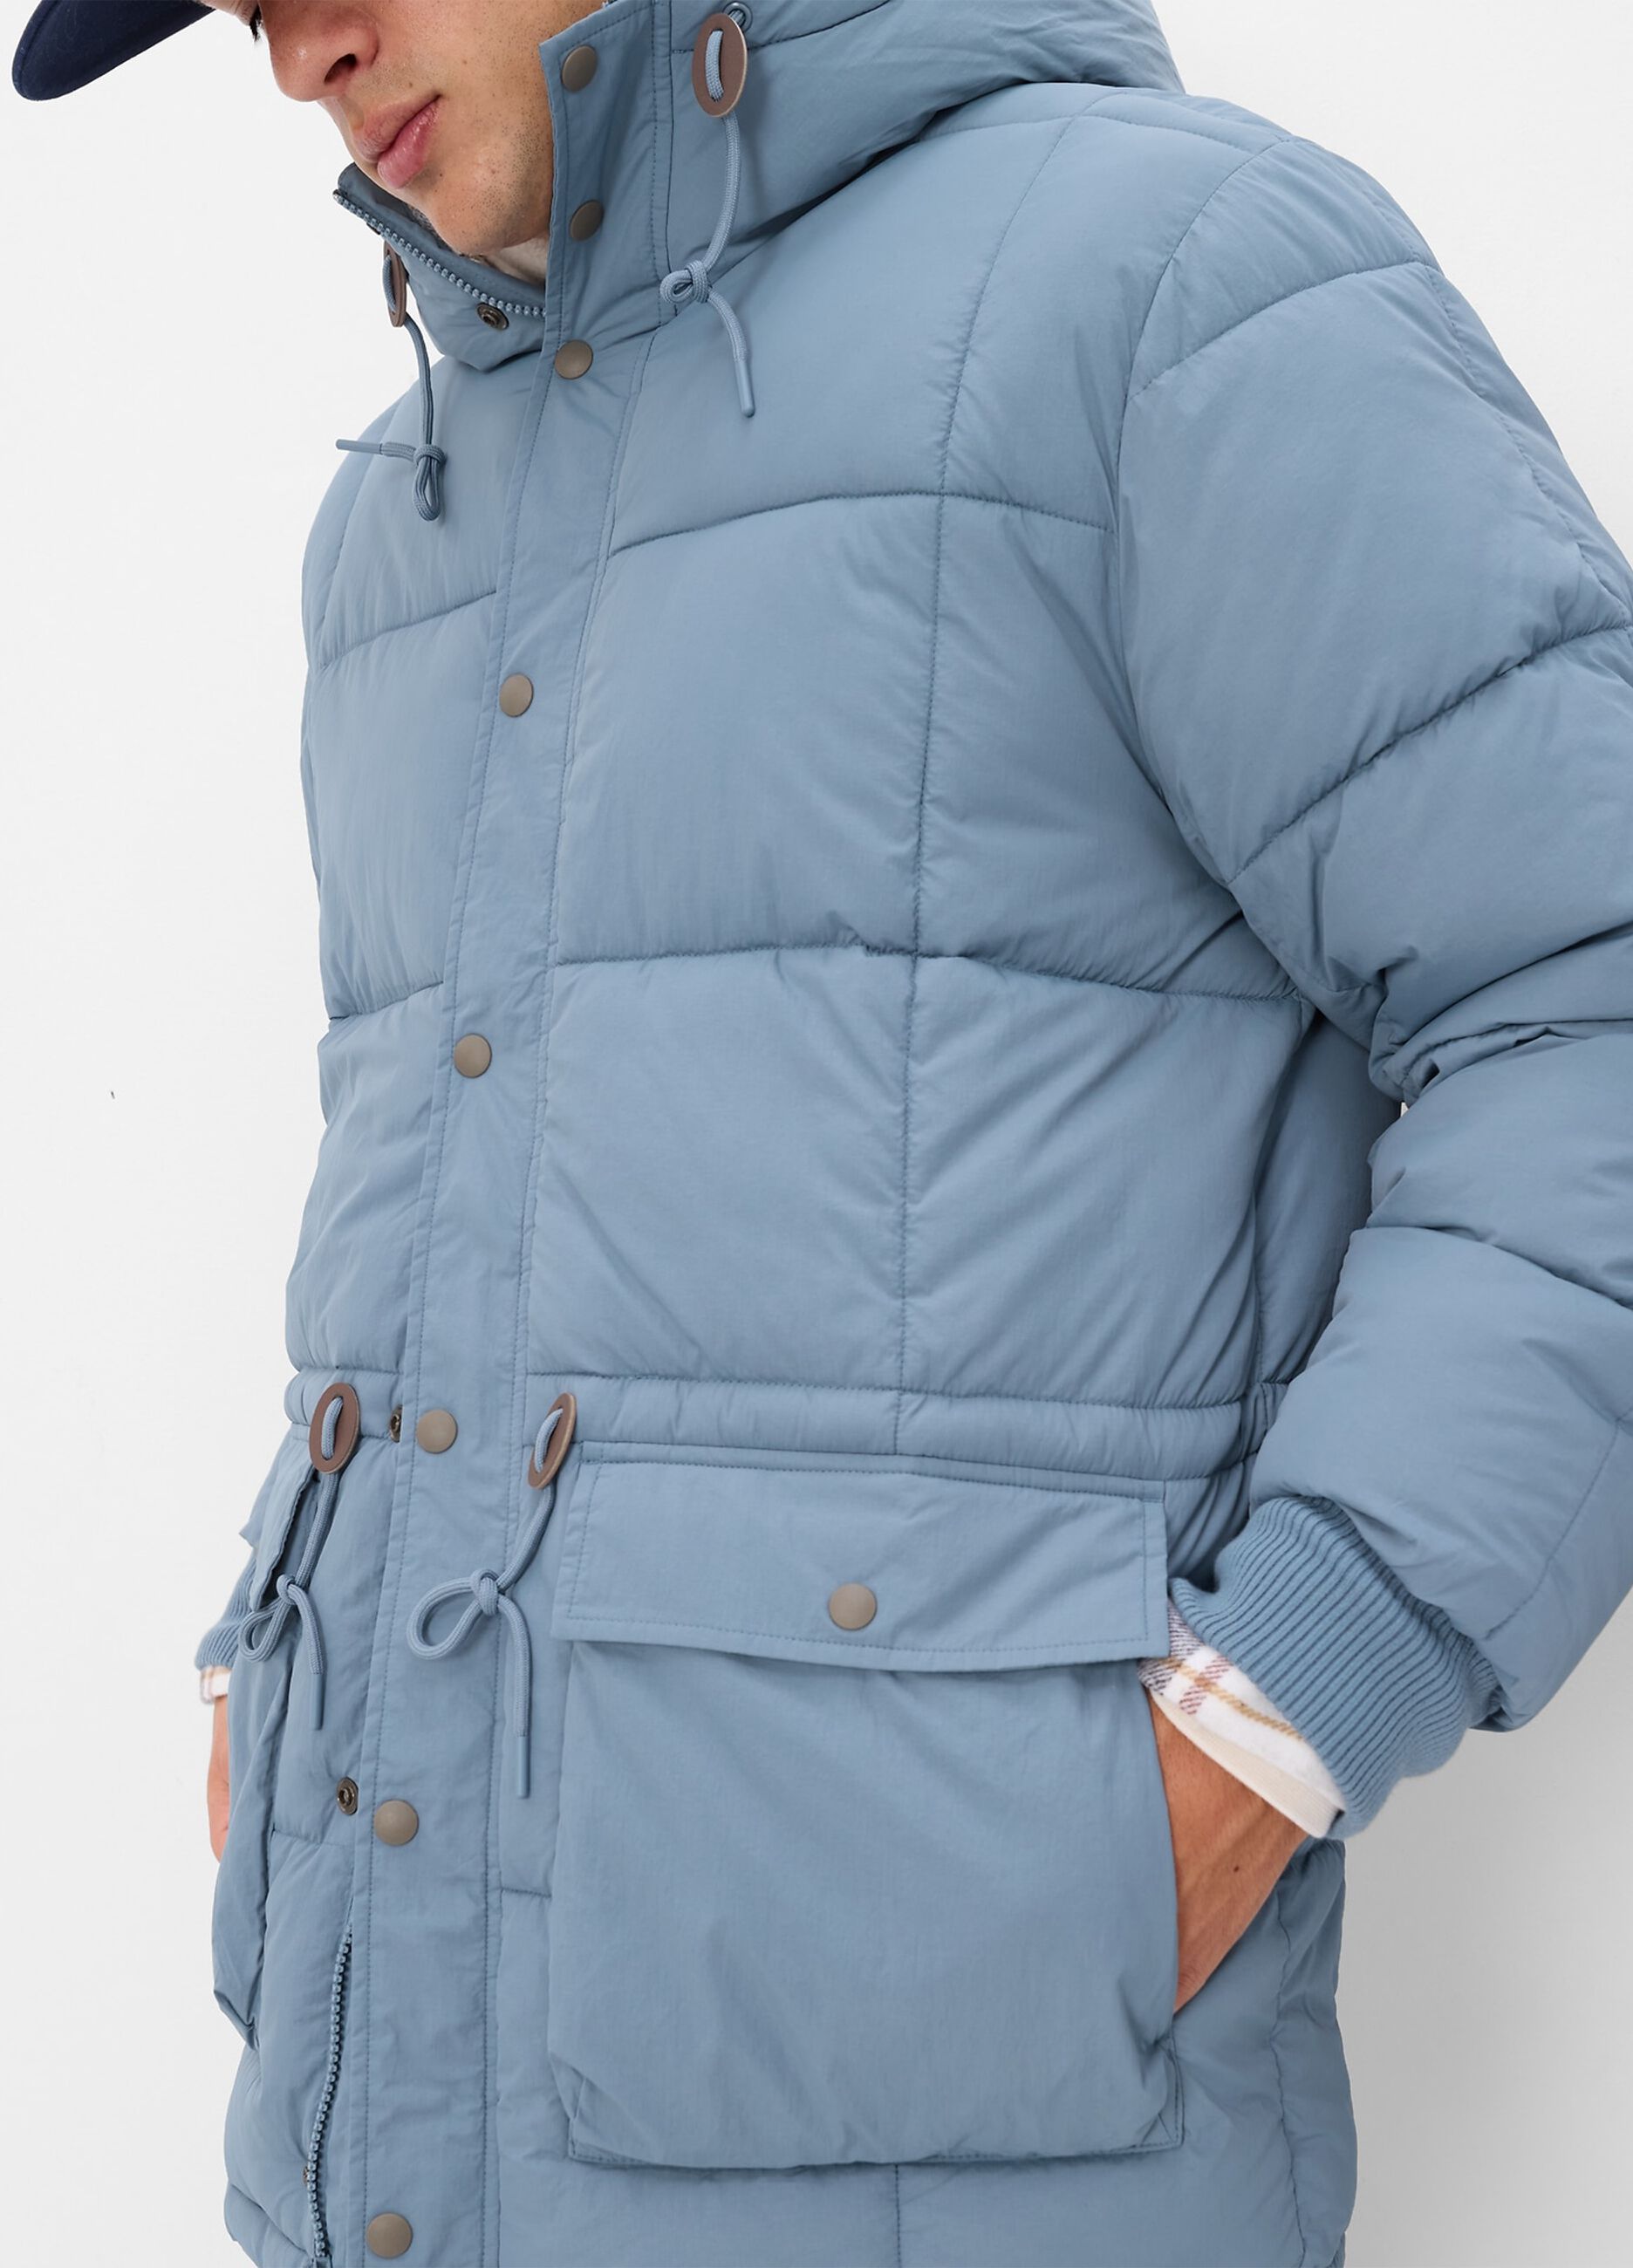 Quilted parka with sherpa lining